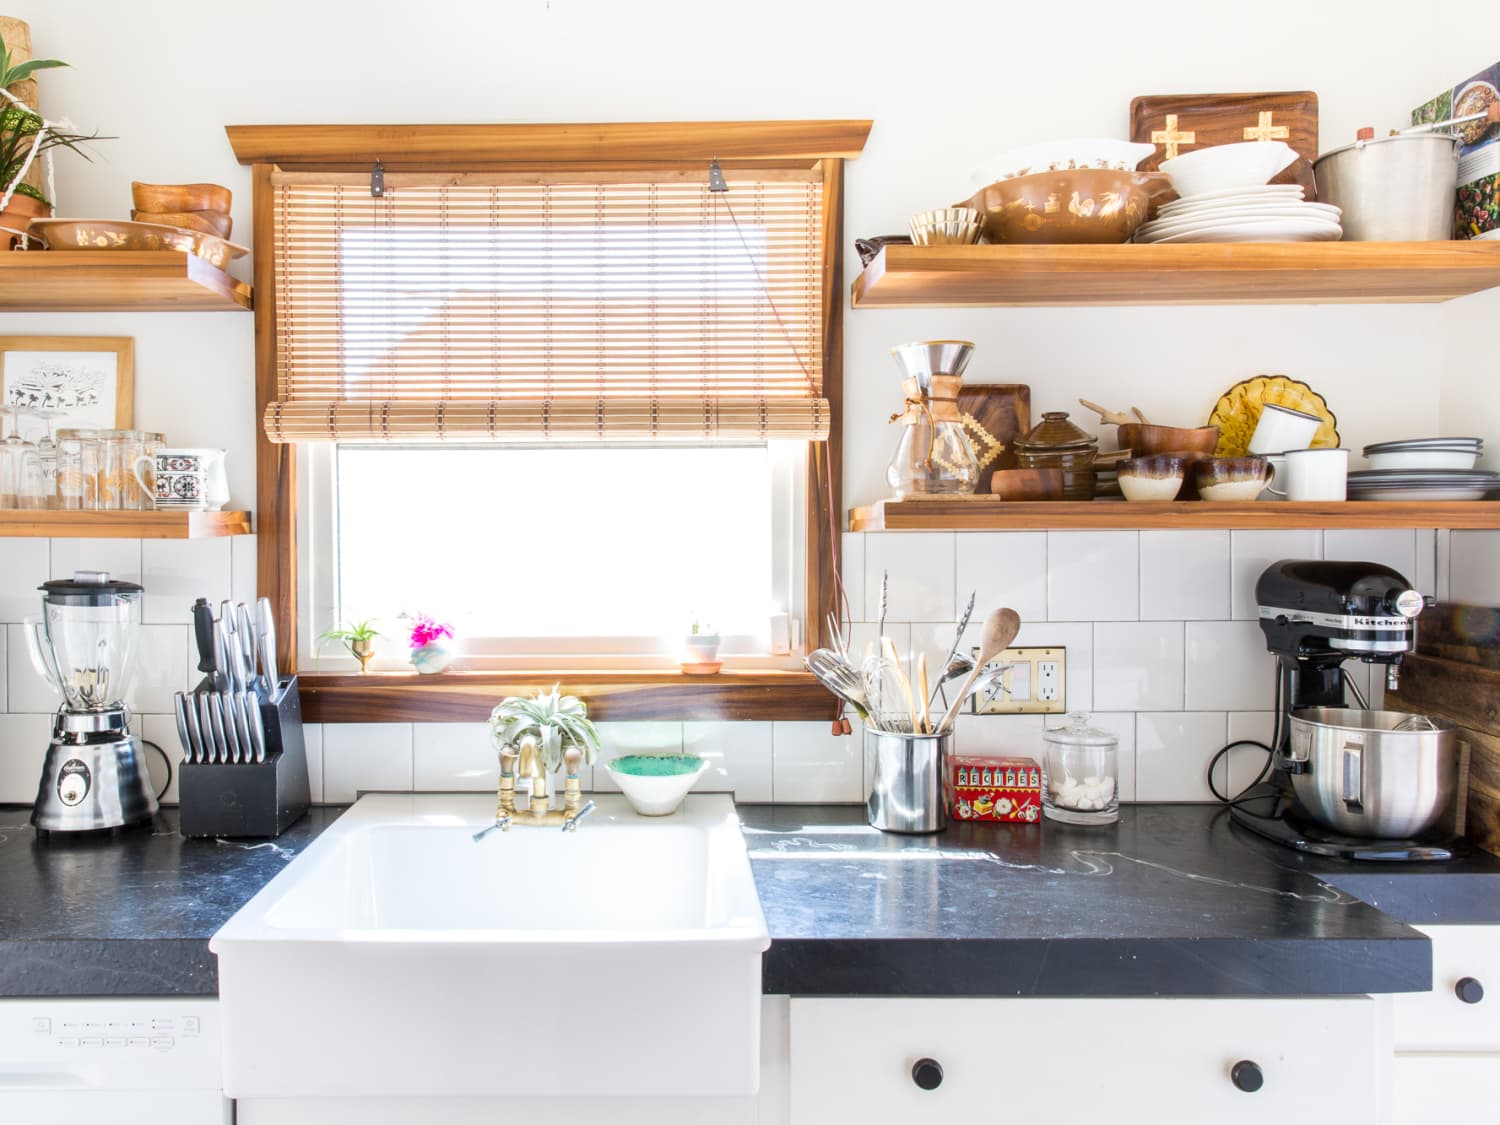 10 kitchen items you don't have to splurge on - Reviewed